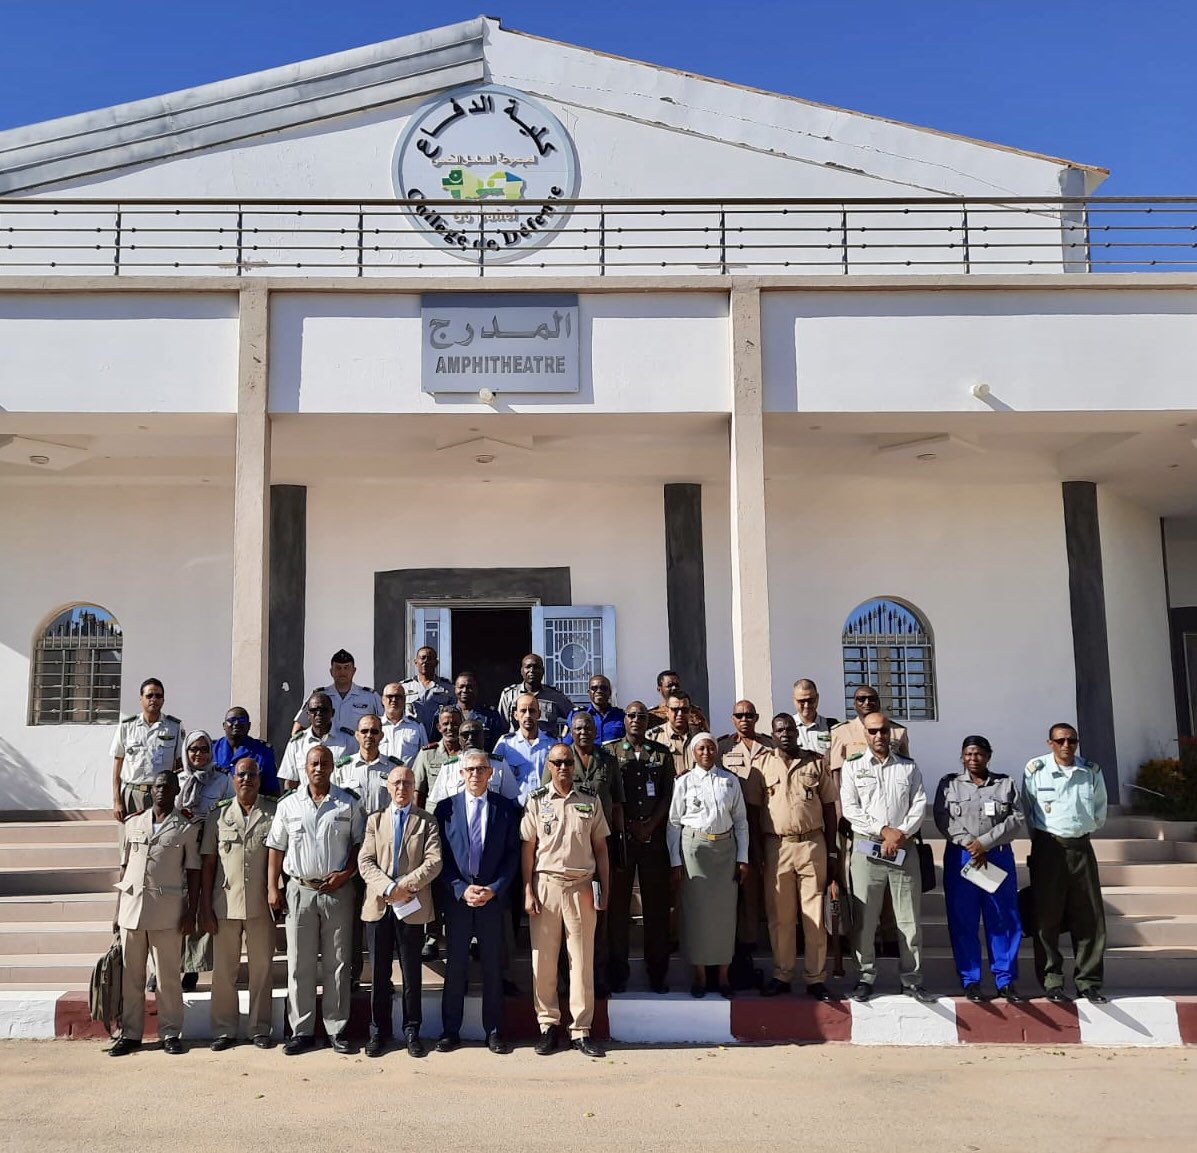 We’ve just completed a SSR training seminar at the Collège de défense du G5 Sahel. 51 students from Burkina Faso, Niger, Tchad and Mauritania (with 3 women officers) participated in high quality exchanges characterized by deep respect of reciprocal cultures.